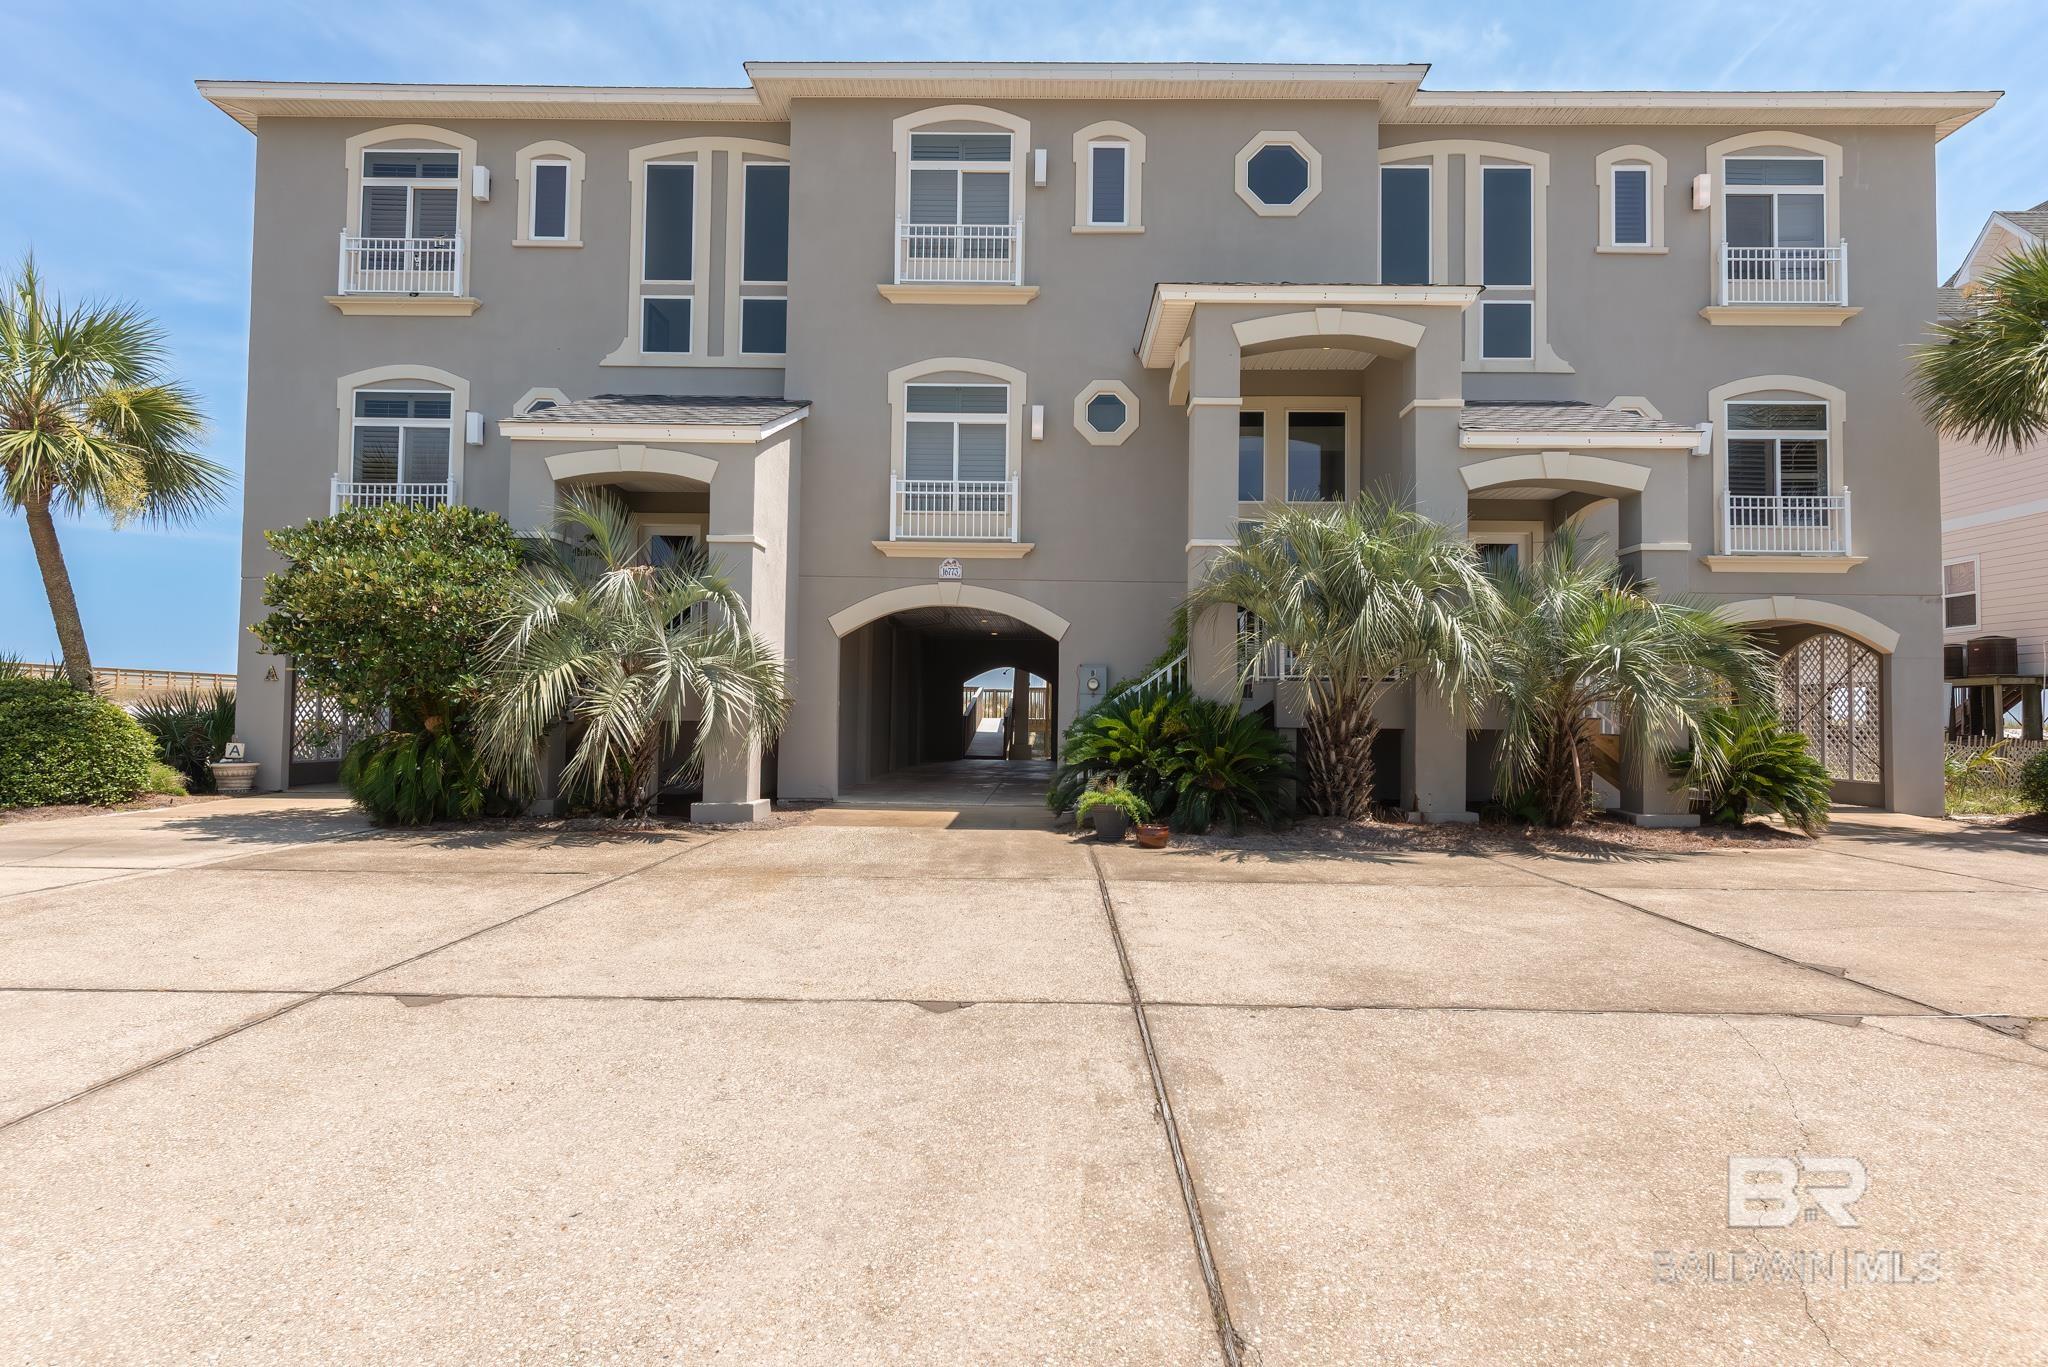 WOW-- Amazing value for a Gulf Front home and truly a little slice of heaven!  This well designed townhome on the east side of a gorgeous tri-plex building features an open kitchen, dining and living area to gaze at the sparkling Gulf of Mexico. The main floor also includes a wet bar, half bath, laundry room and one bedroom with a private bath!  Upstairs you will find 3 more bedrooms, each with its own private bath; 2 with balcony access.  Enjoy beach and gulf views from balconies on both levels! The ground floor has two carport parking spaces, a storage room and boardwalk access. Lovely landscaping and palm trees adorn the front lawn. This building does not allow STRs, making it an ideal primary or secondary home for only 3 very lucky owners, where you can relax and enjoy this fabulous low density Gulf Front location with family and friends. Very low HOA fees.  Seller believes all information to be accurate.  Buyer or buyers agent to verify all information to buyers satisfaction.